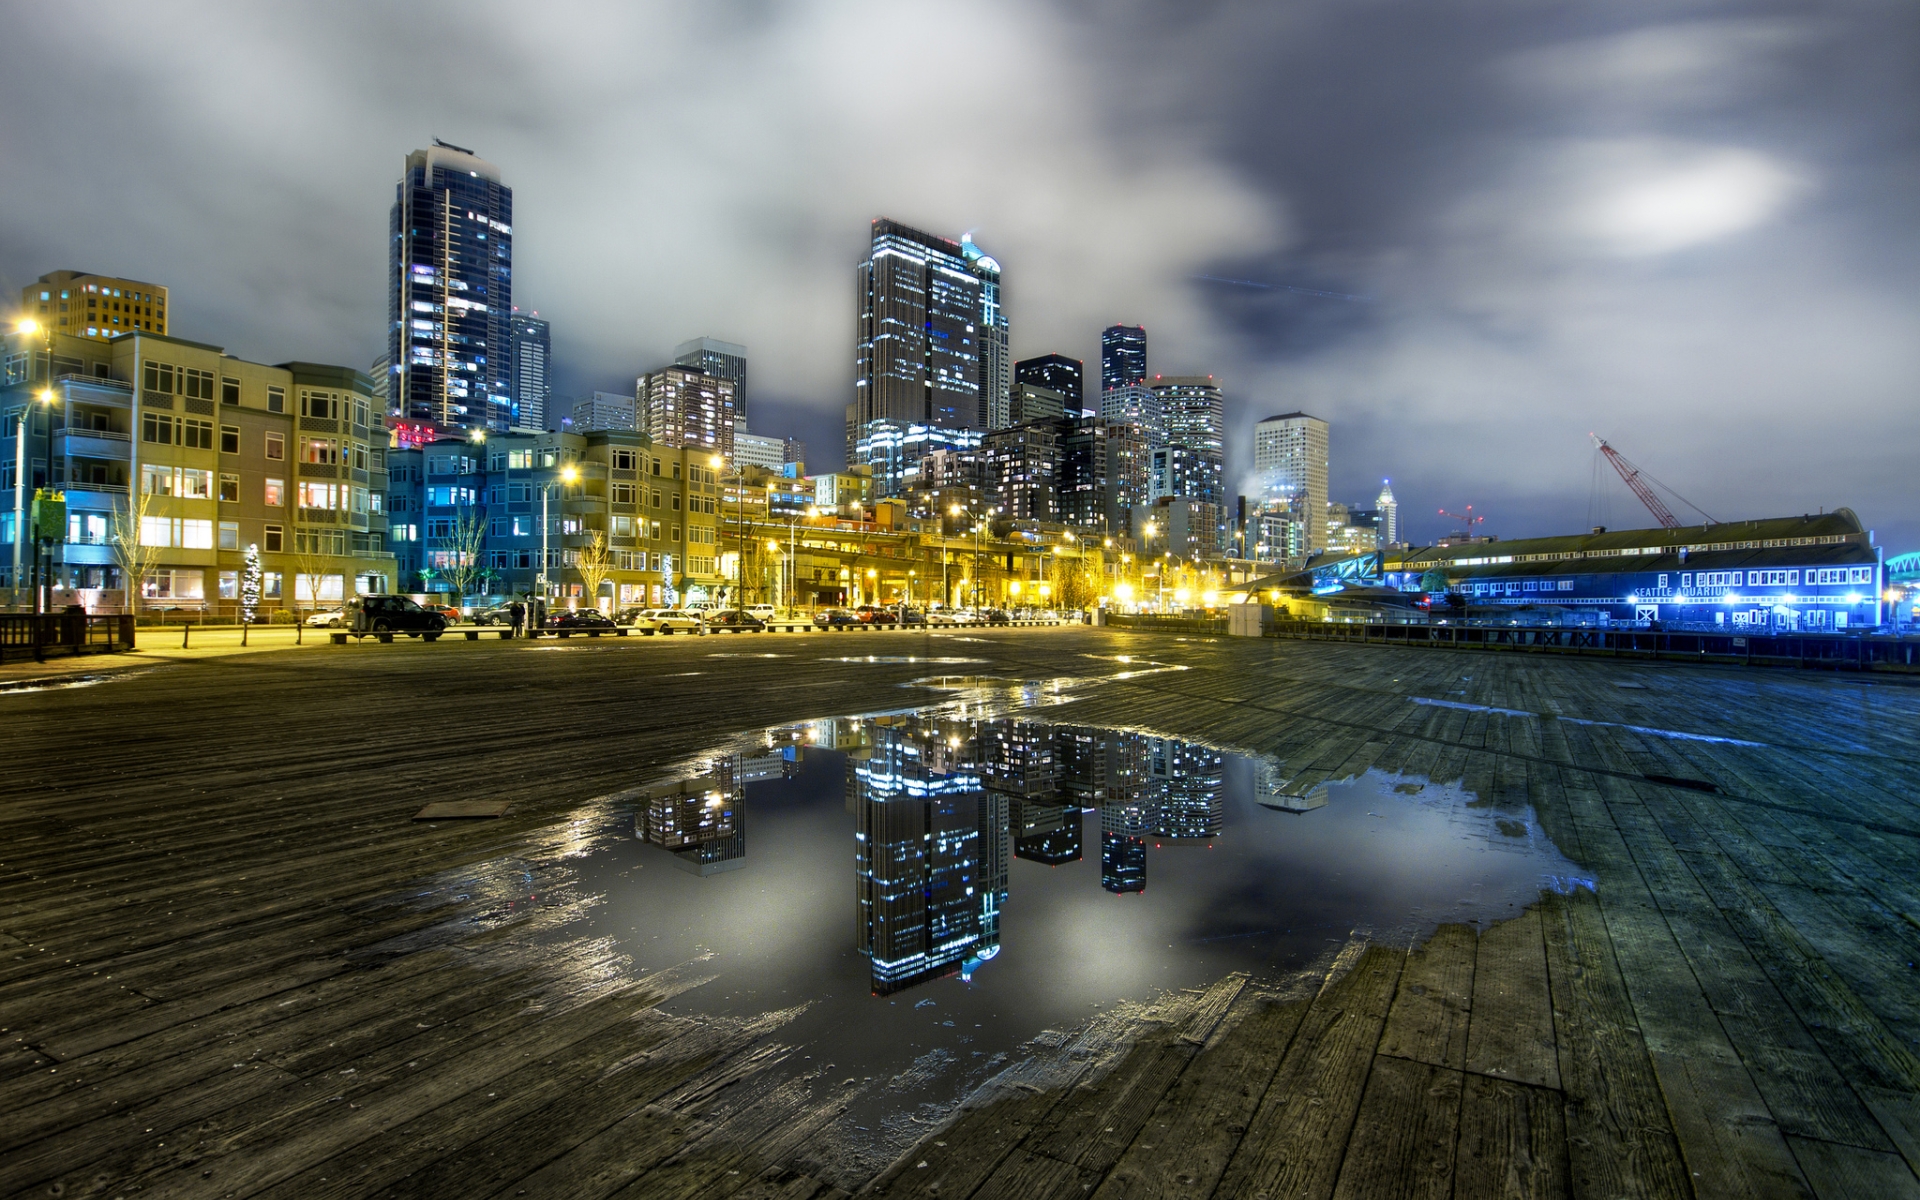 man made, city, building, dave morrow, night, puddle, reflection, seattle, skyscraper, cities High Definition image